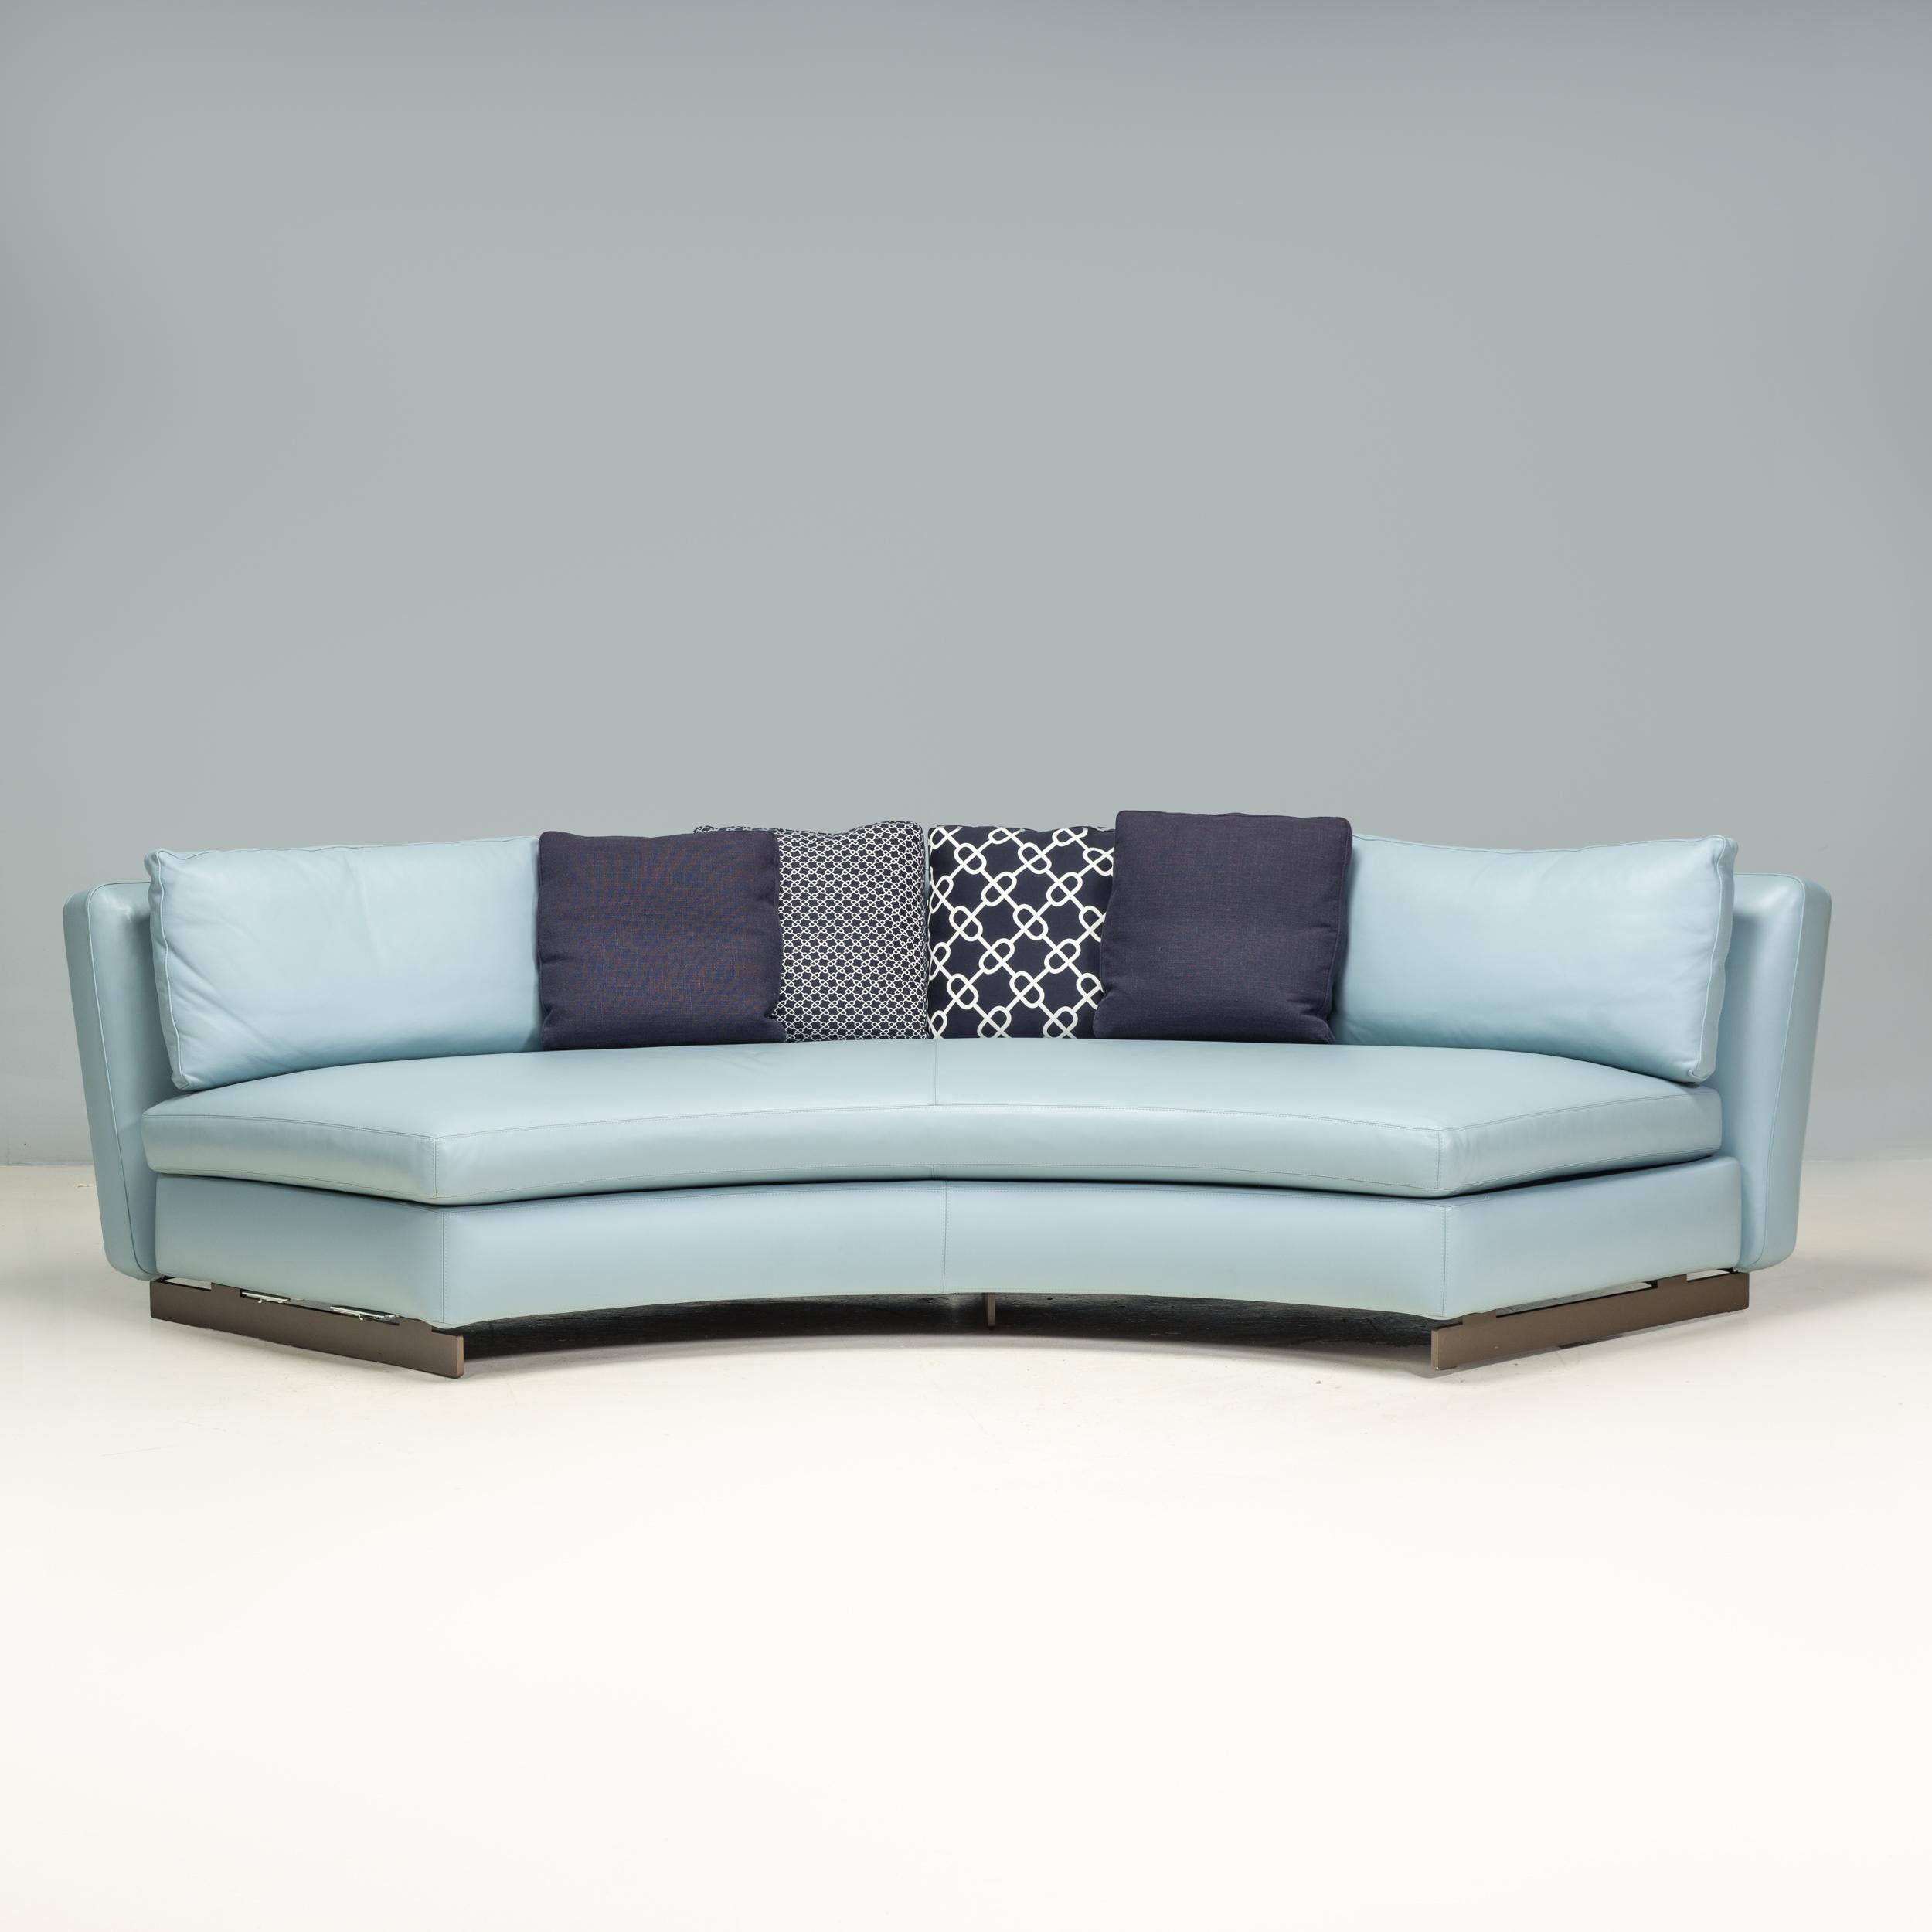 Originally designed by Roldolfo Dordoni in 2015 and manufactured by Minotti, the Seymour low sofa is a fantastic example of modern Italian design.

With a curvaceous silhouette, the sofa has a semi-circular seat with a curved backrest and sits on